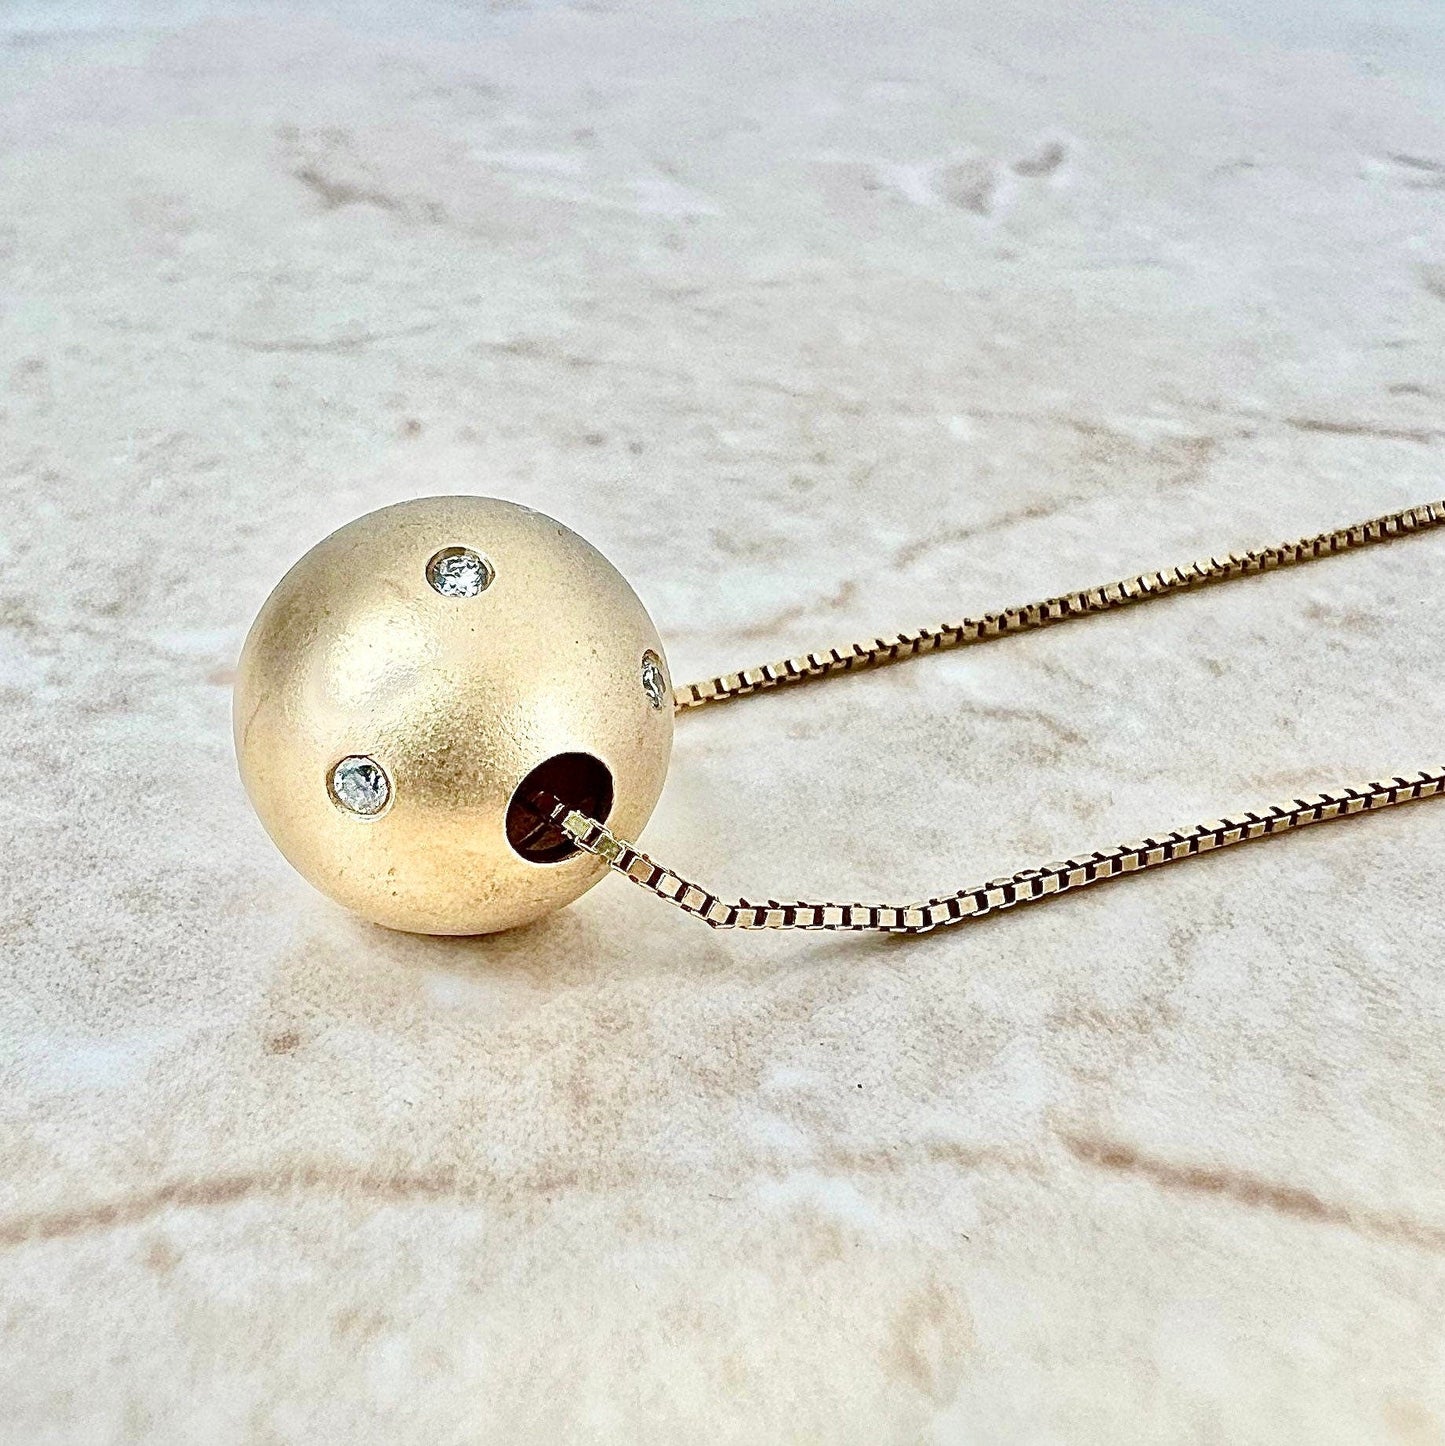 14K Diamond Sphere Pendant Necklace - Yellow Gold Pendant - Diamond Necklace - Gold Slide Pendant - Gold Ball Pendant - Best Gift For Her